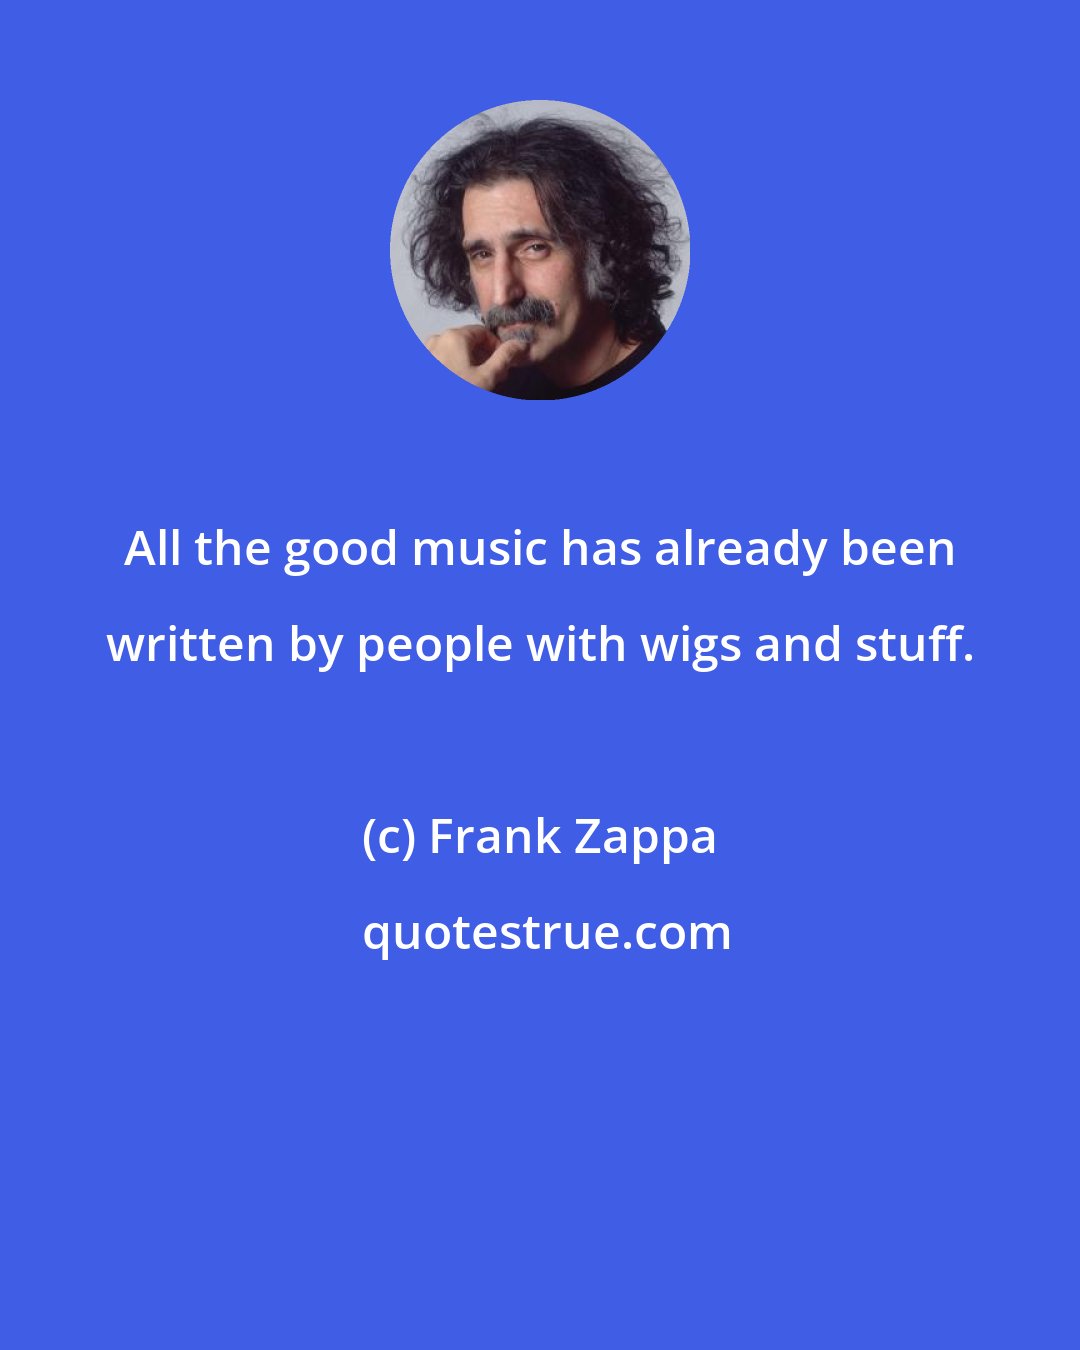 Frank Zappa: All the good music has already been written by people with wigs and stuff.